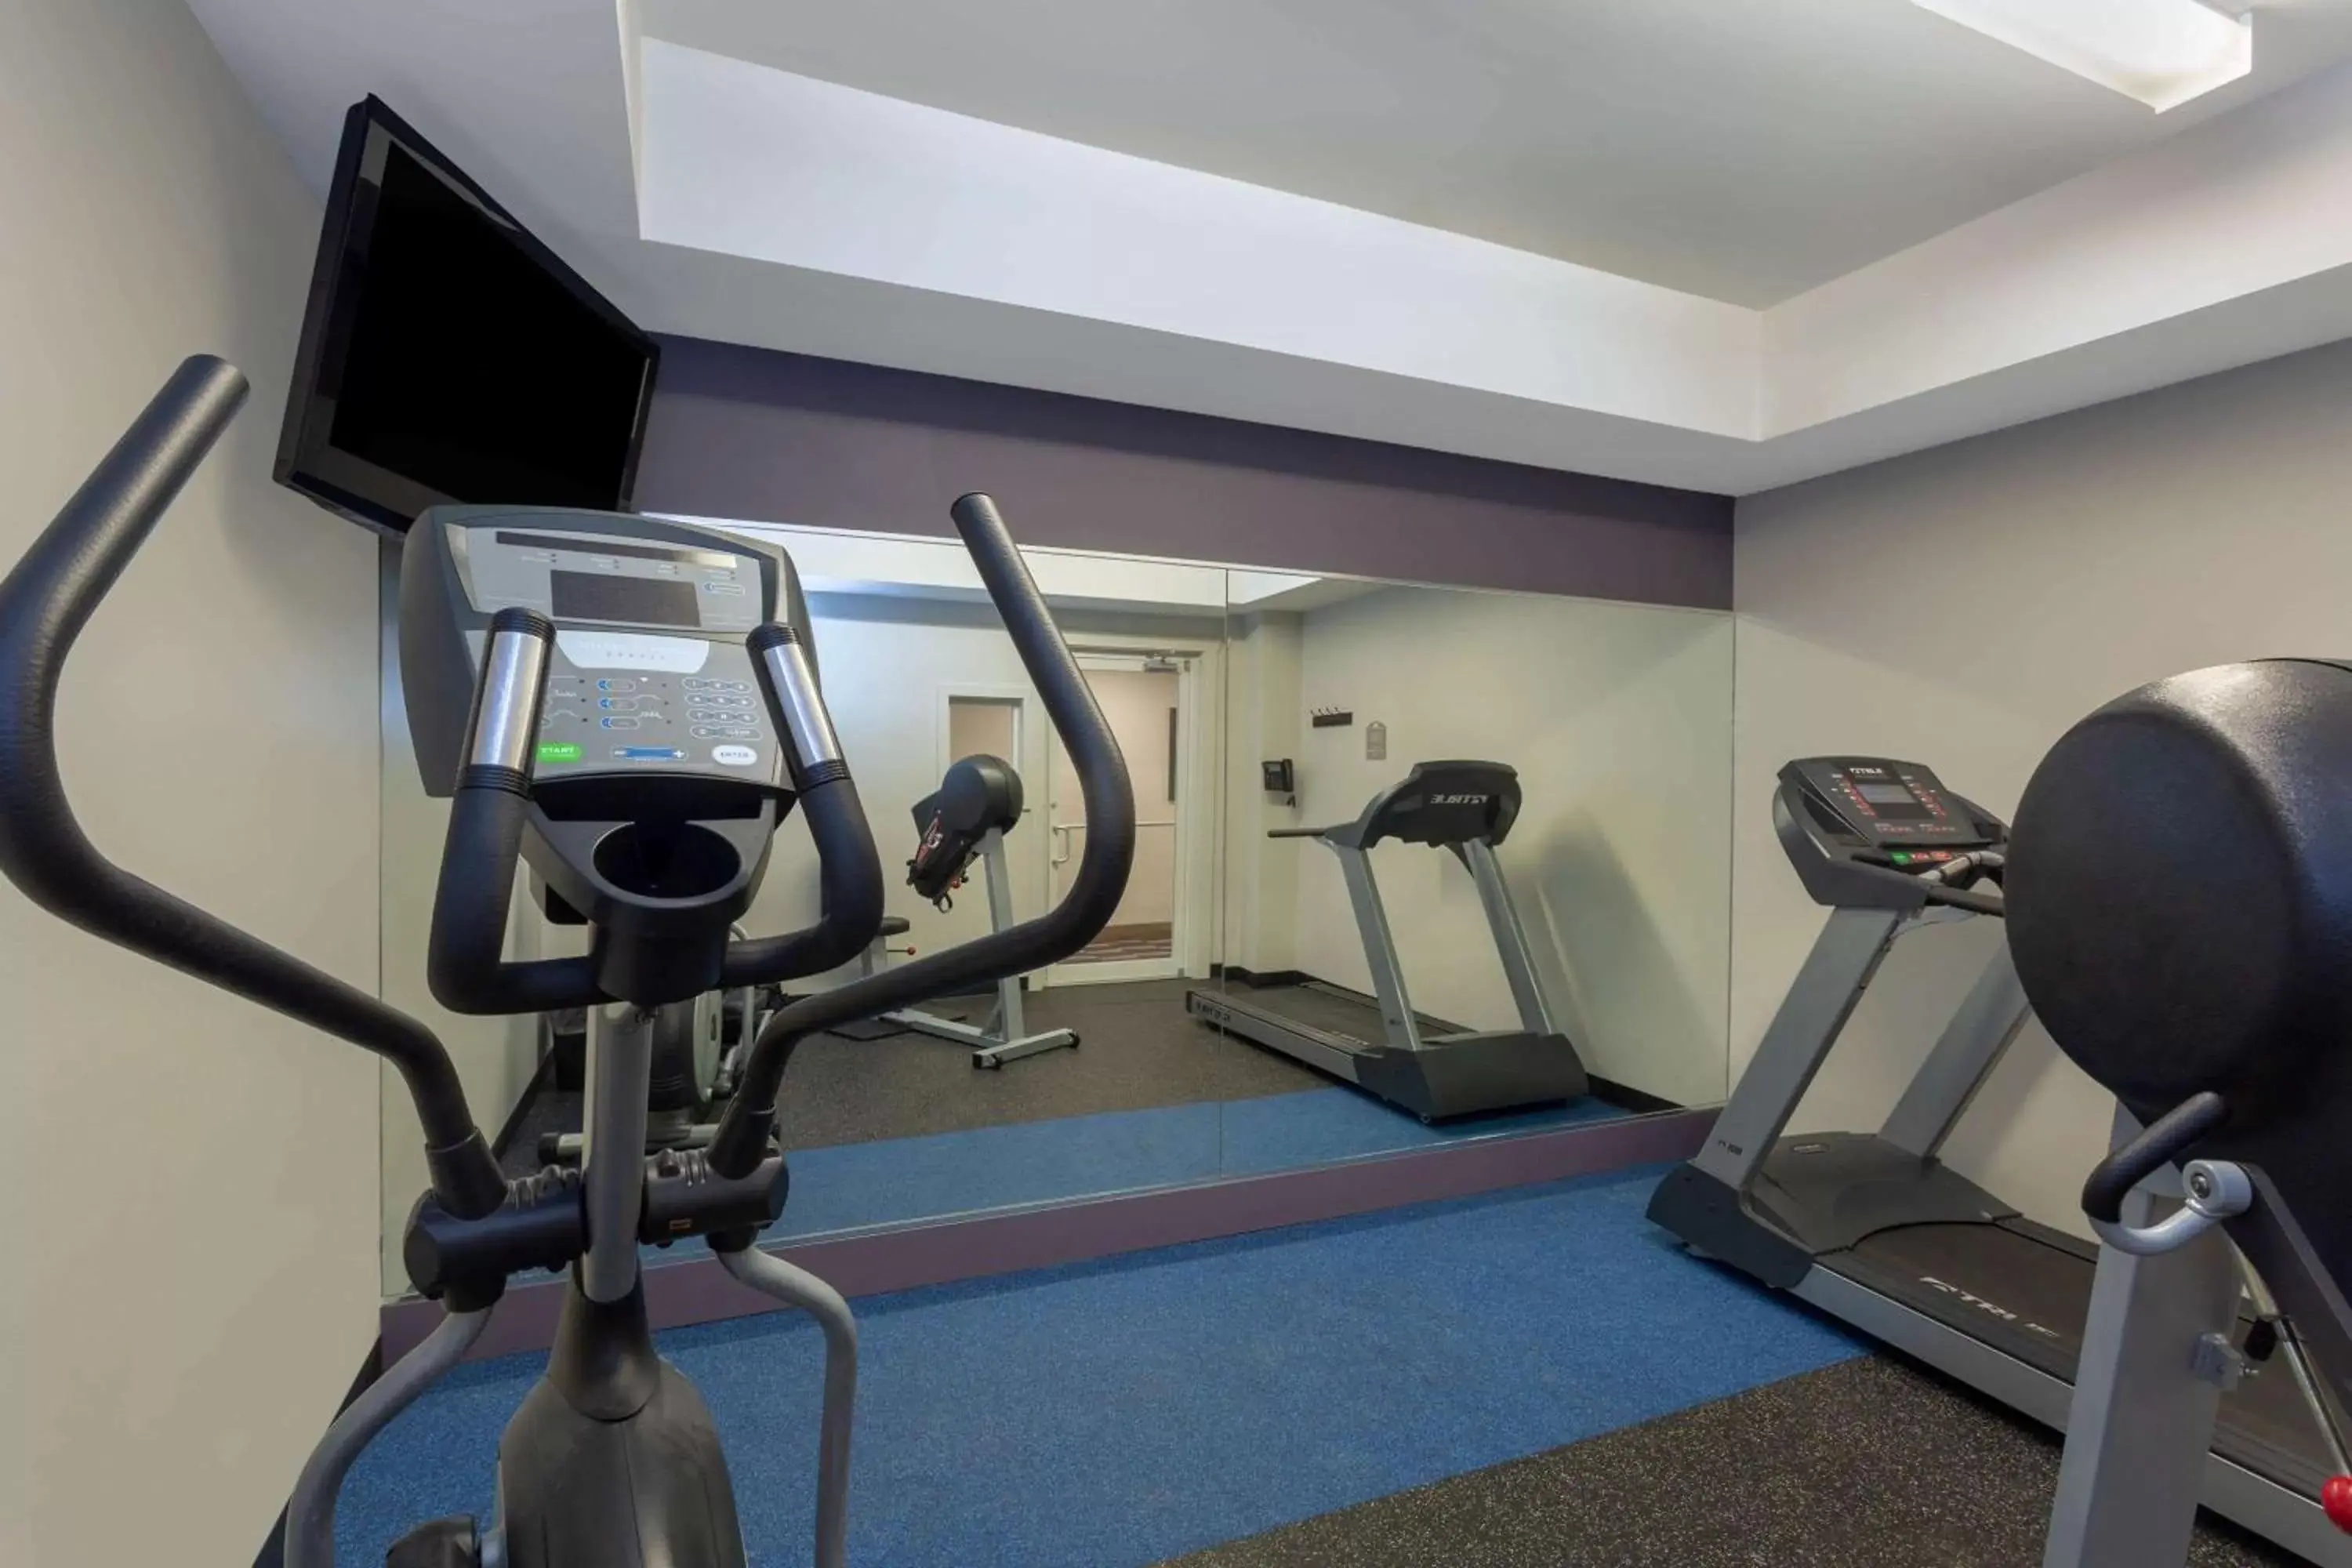 Fitness centre/facilities, Fitness Center/Facilities in Microtel Inn & Suites by Wyndham Brooksville